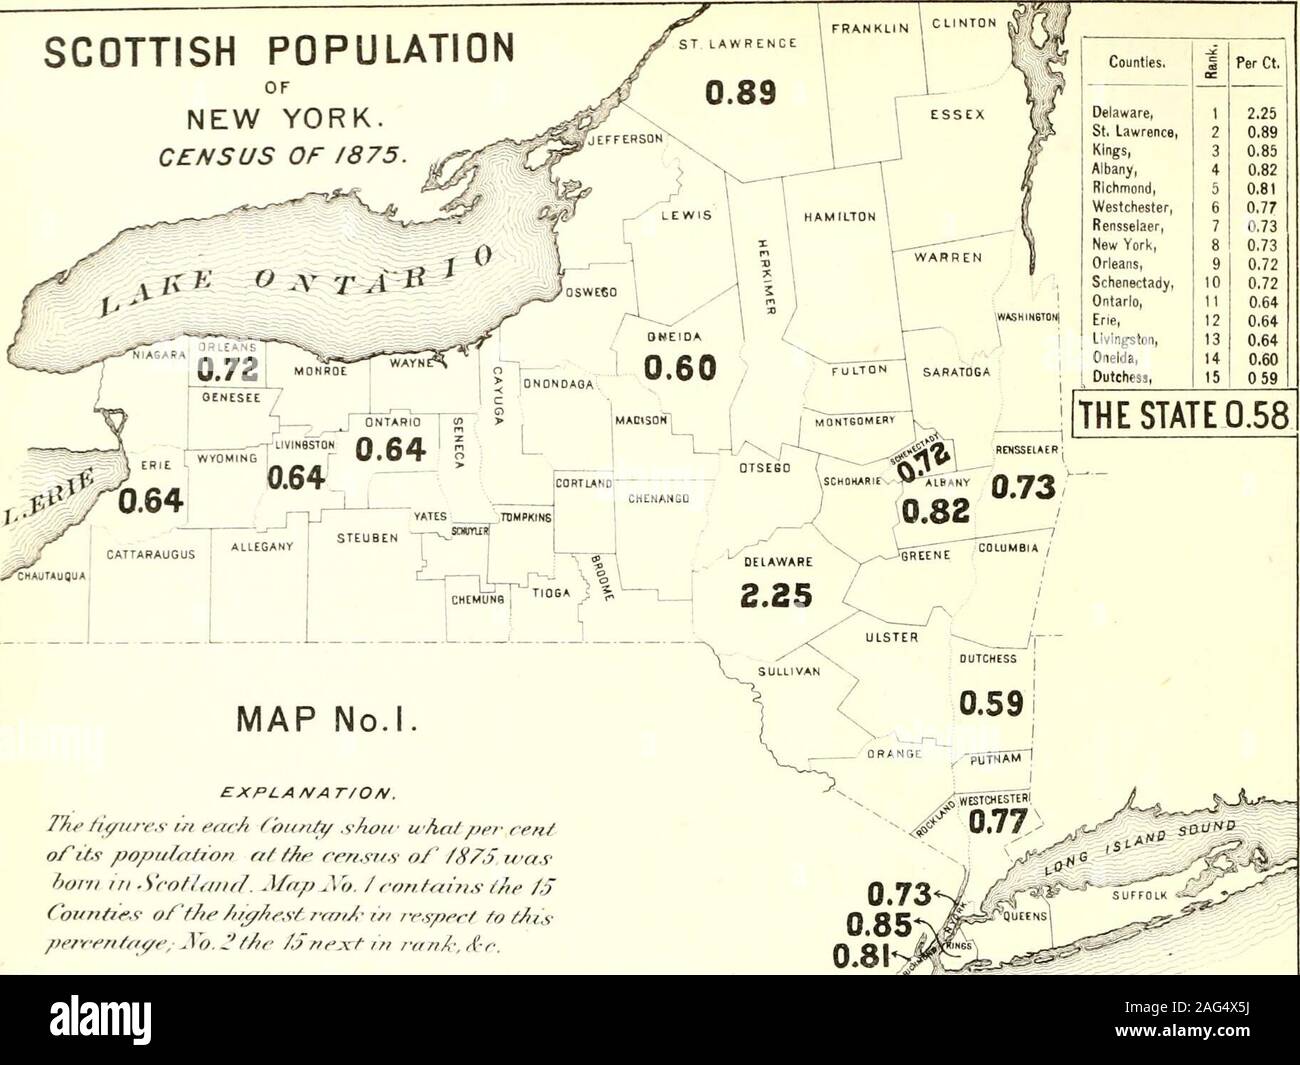 . Census of the state of New York for 1875. MapN. SCOTTISH POPULATION OF NEW YORK. Census of 1875. SCOTTISH POPULATION OF NEW YORK.CENSUS OF 1875 Counties. 1 Per Ct. Delaware, 1 2,25 St. Lawrence, 2 0.89 Kings, 3 0.85 Albany, 4 0.82 Richmond, 5 0.81 Westchester, 6 0.77 Rensselaer, 7 0.73 New York, 8 0.73 Orleans, 9 0.72 Schenectady, 10 0.72 Ontario, 11 0.64 Erie, 12 0.64 Livingston, 13 0.64 Oneida, 14 0,60 Dutchess, 15 0 59 THE STATE 0.58. EXPLA/VAT/ON.77if /i(/itrt:- i^-i e&lt;ifA /h/t/i/^ shoiv uha/pfr reniorifs popu/afzon n/ f^/ie renstv o/ /^Zy. ?/y/.$//w// in .Srof/ri/ifL .Vnp Ao. /conff Stock Photo